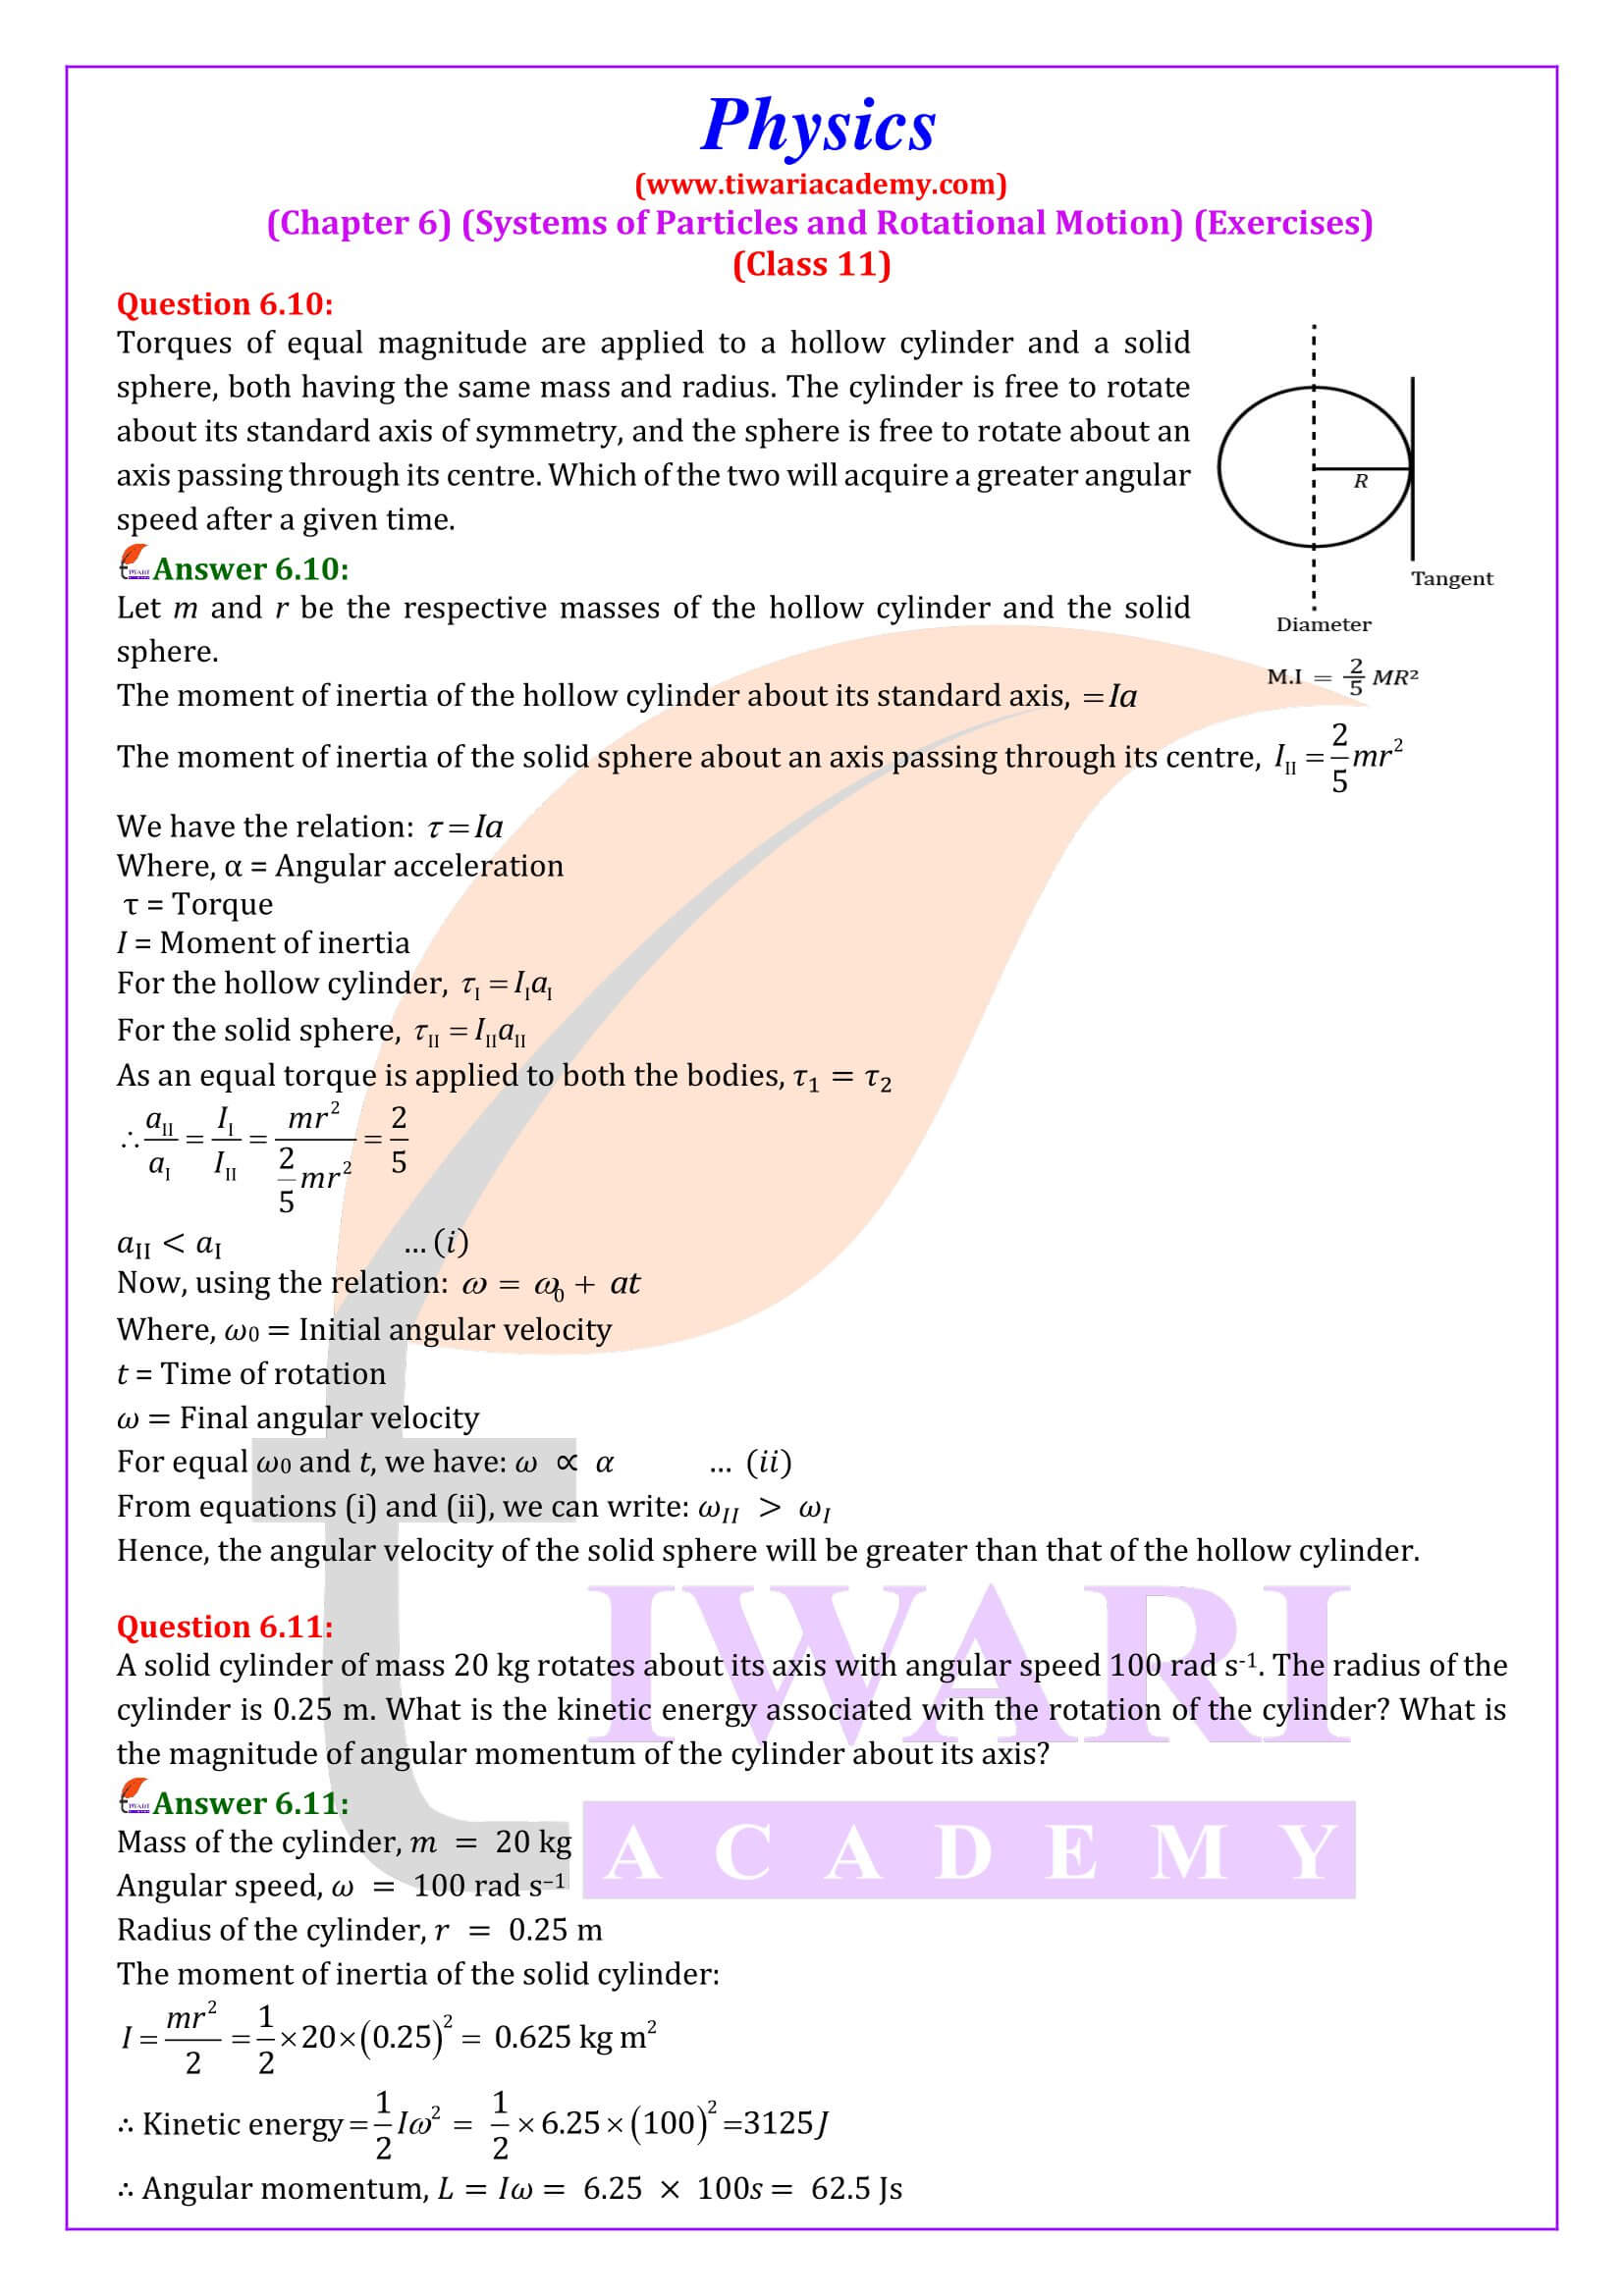 NCERT Solutions for Class 11 Physics Chapter 6 Answers